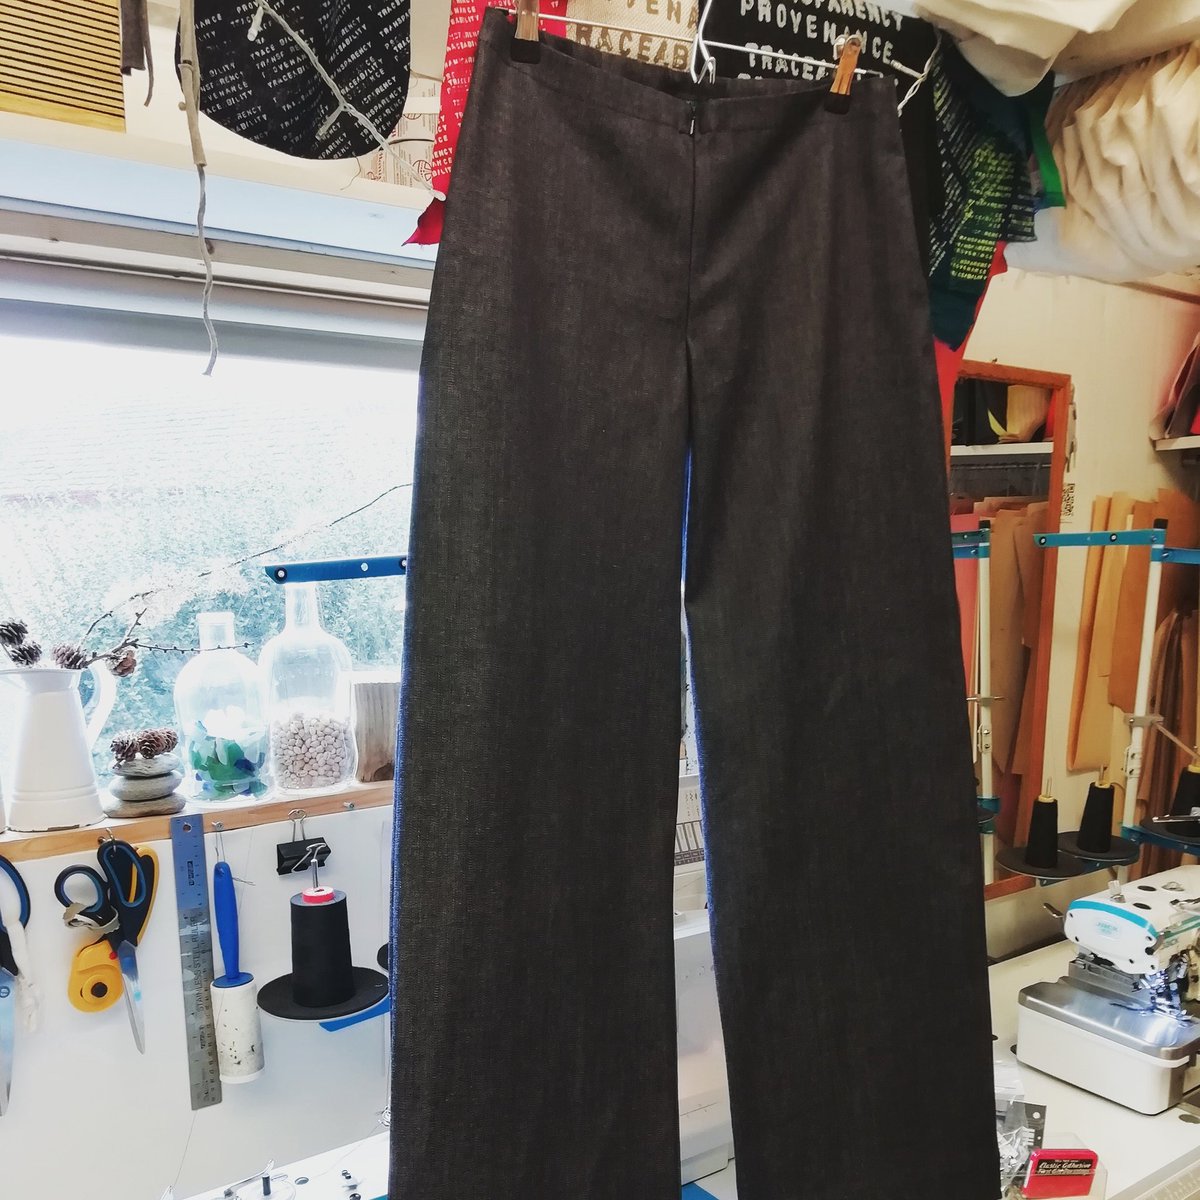 Apparently big trousers are back! Great news for my Roobedo original wide leg slax which are still going strong, and have been for over 20 years. Now in #organiccotton indigo denim. Same cut, hidden zip, soft waist & wide leg. #madeinscotland #sustainablefashion #widelegtrousers